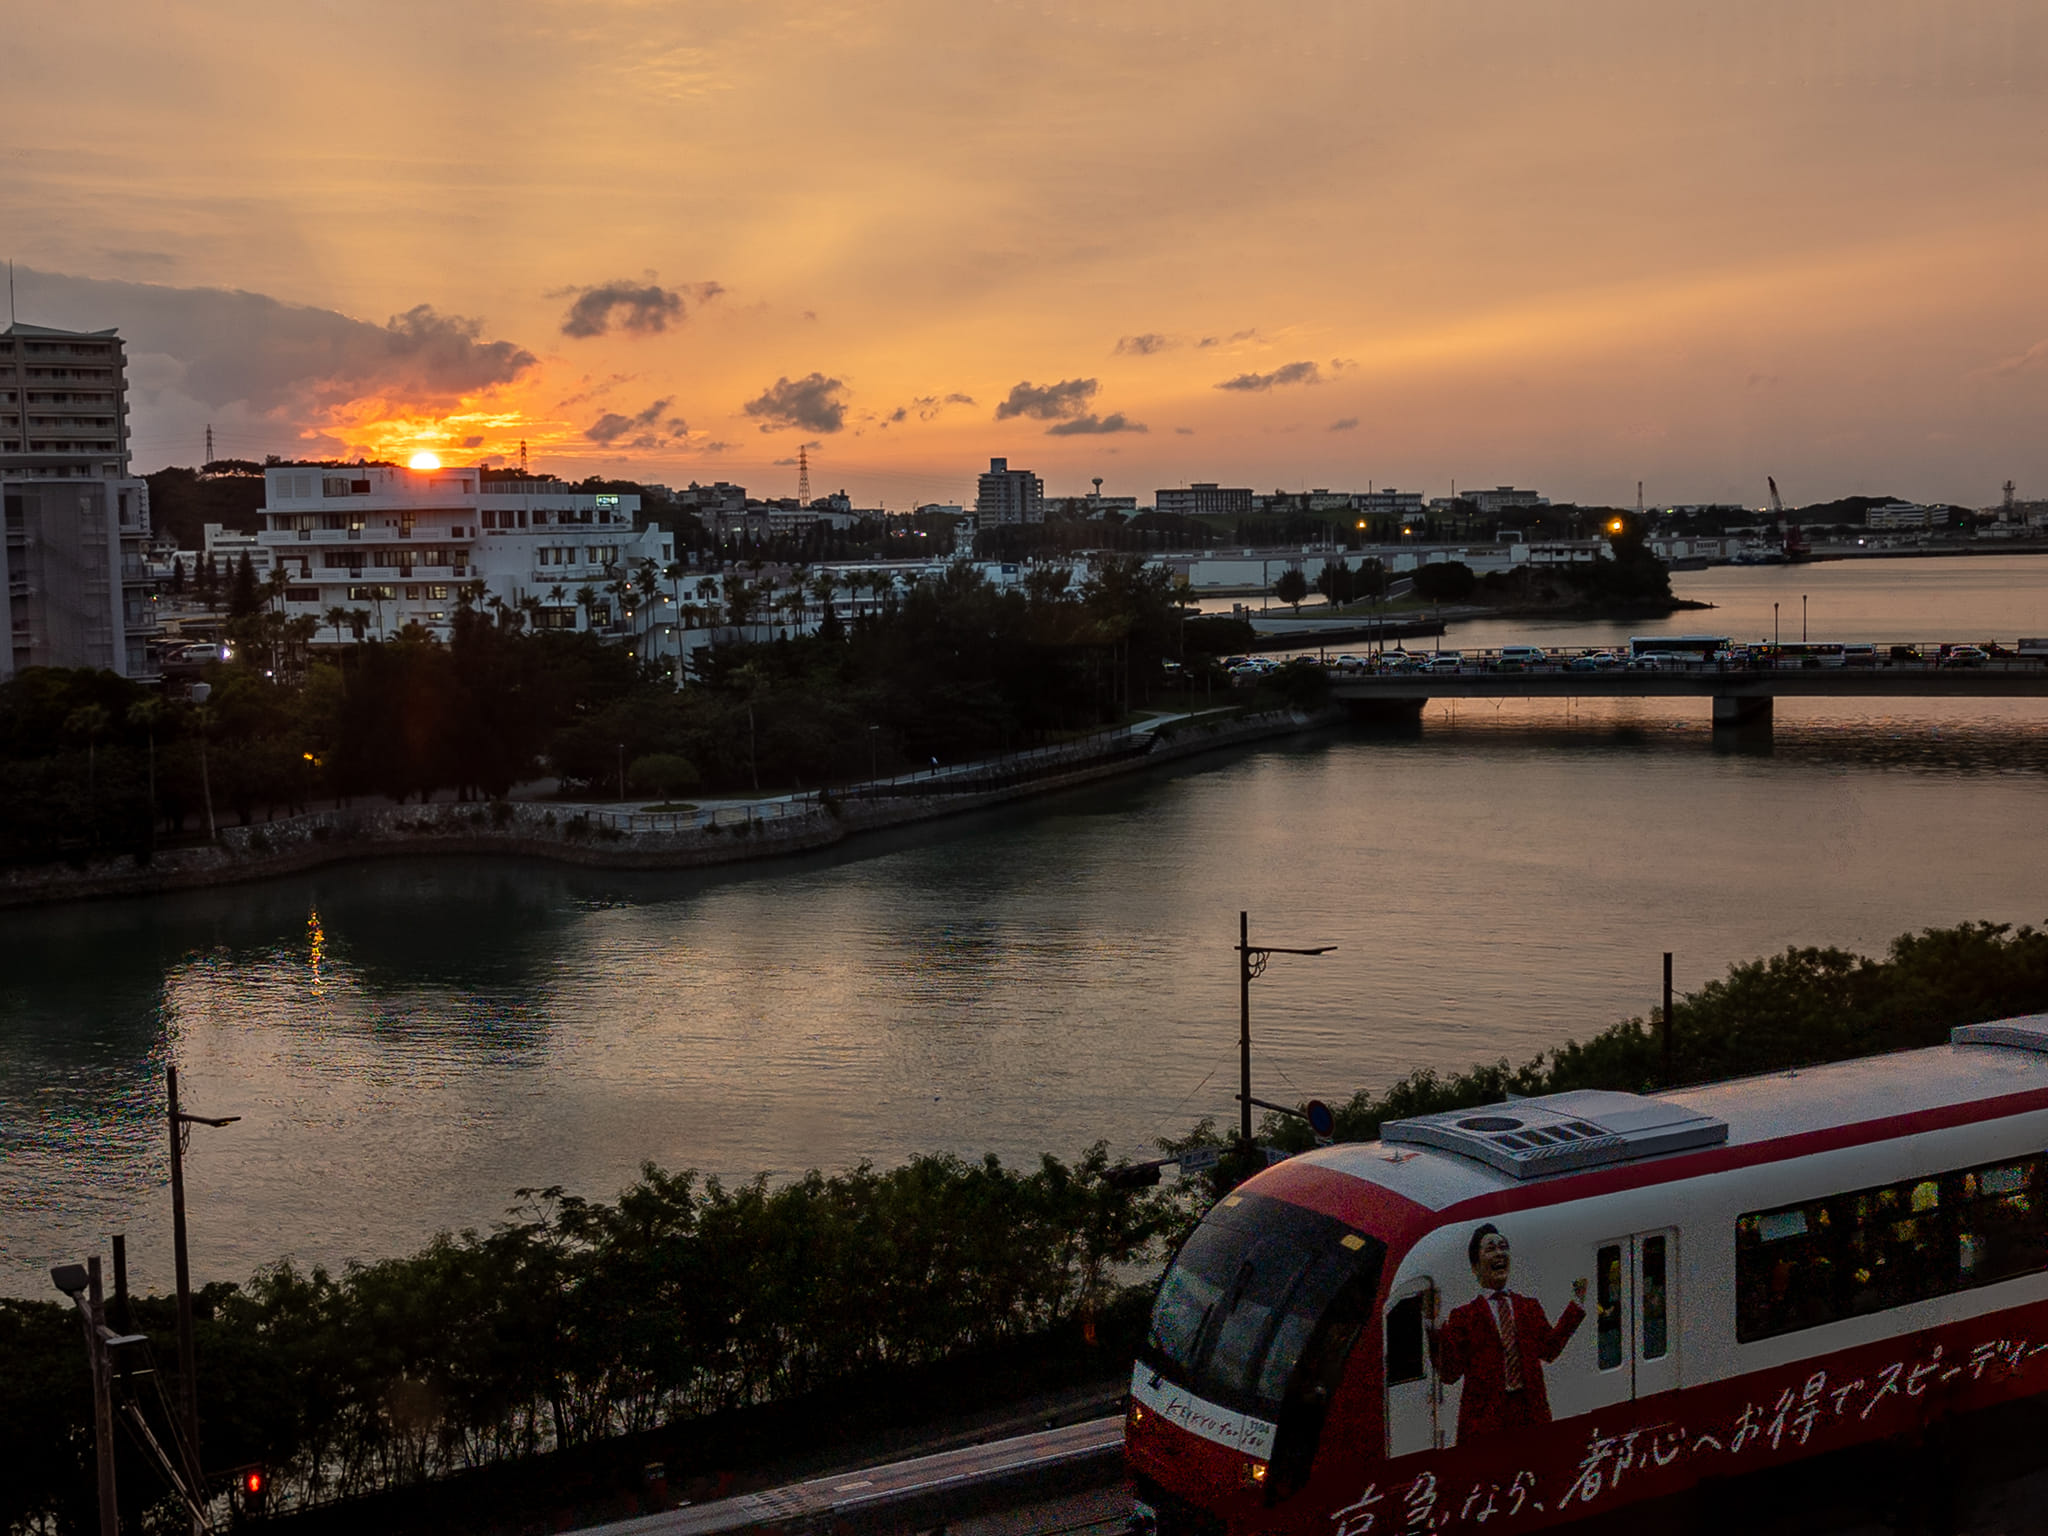 The sun sets over some naha buildings in the left of the image as a naha monorail goes by towards the bottom